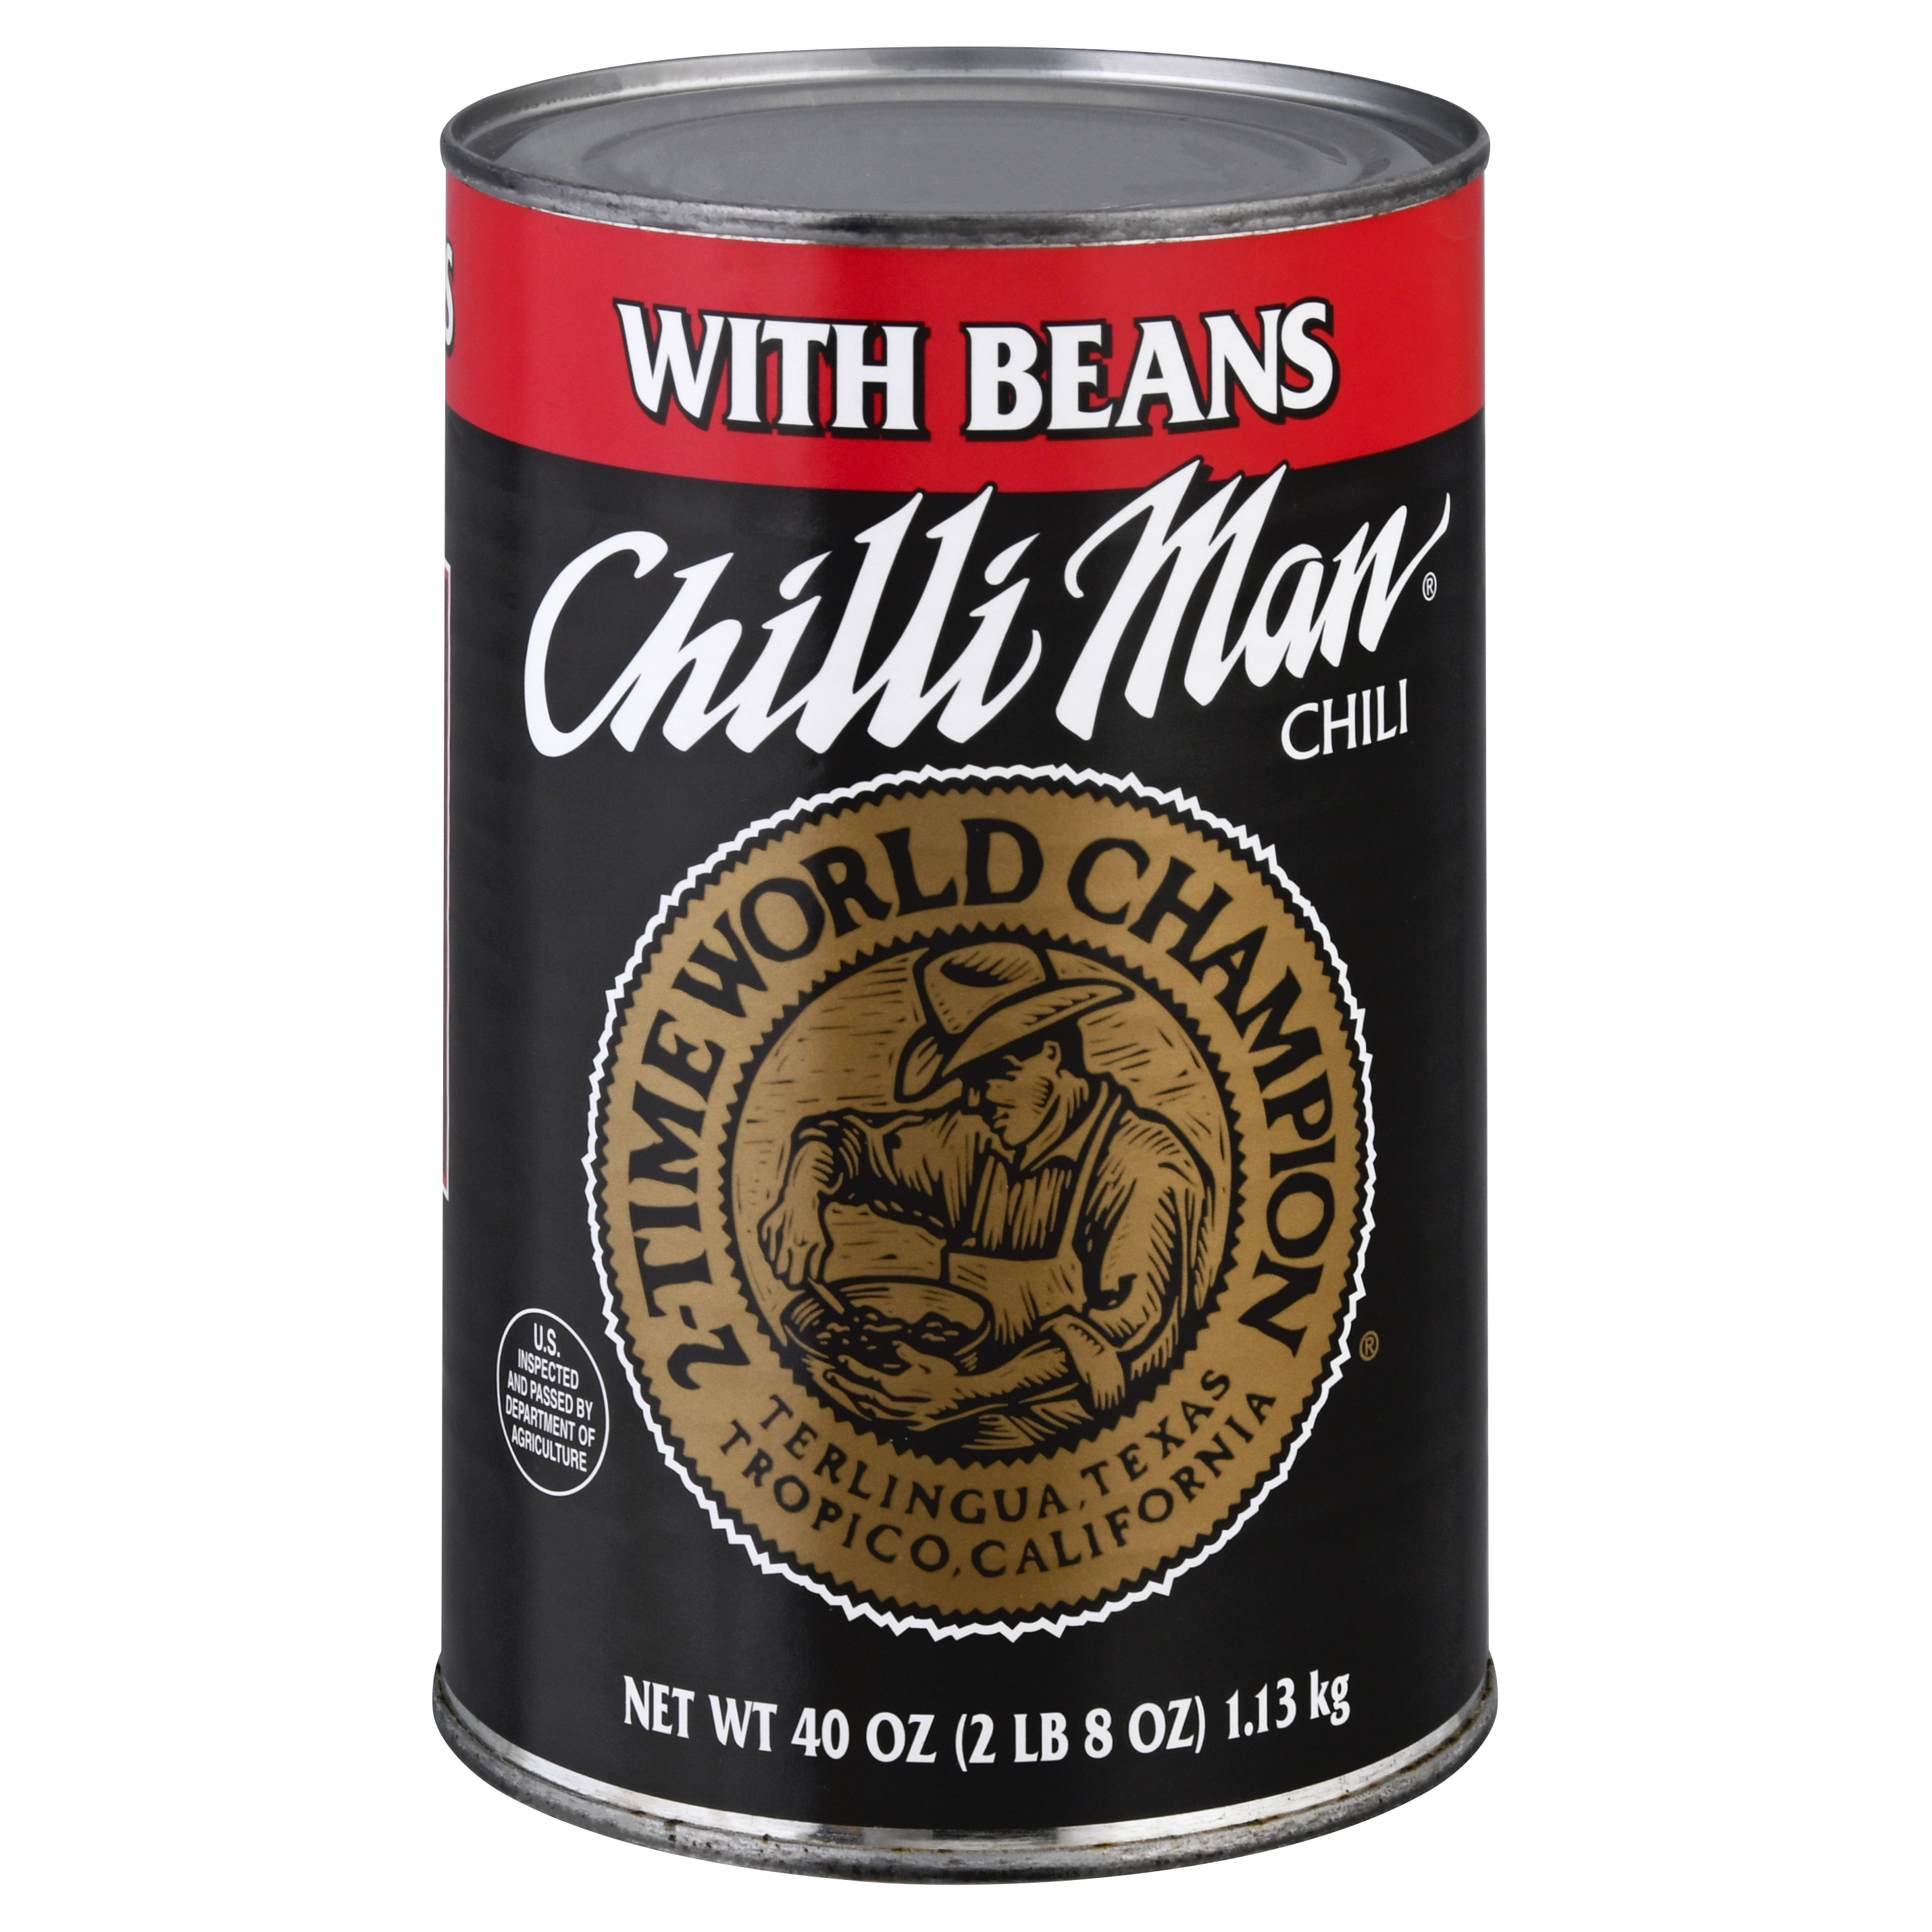 Chilli Man Chili With Beans 40 Oz image